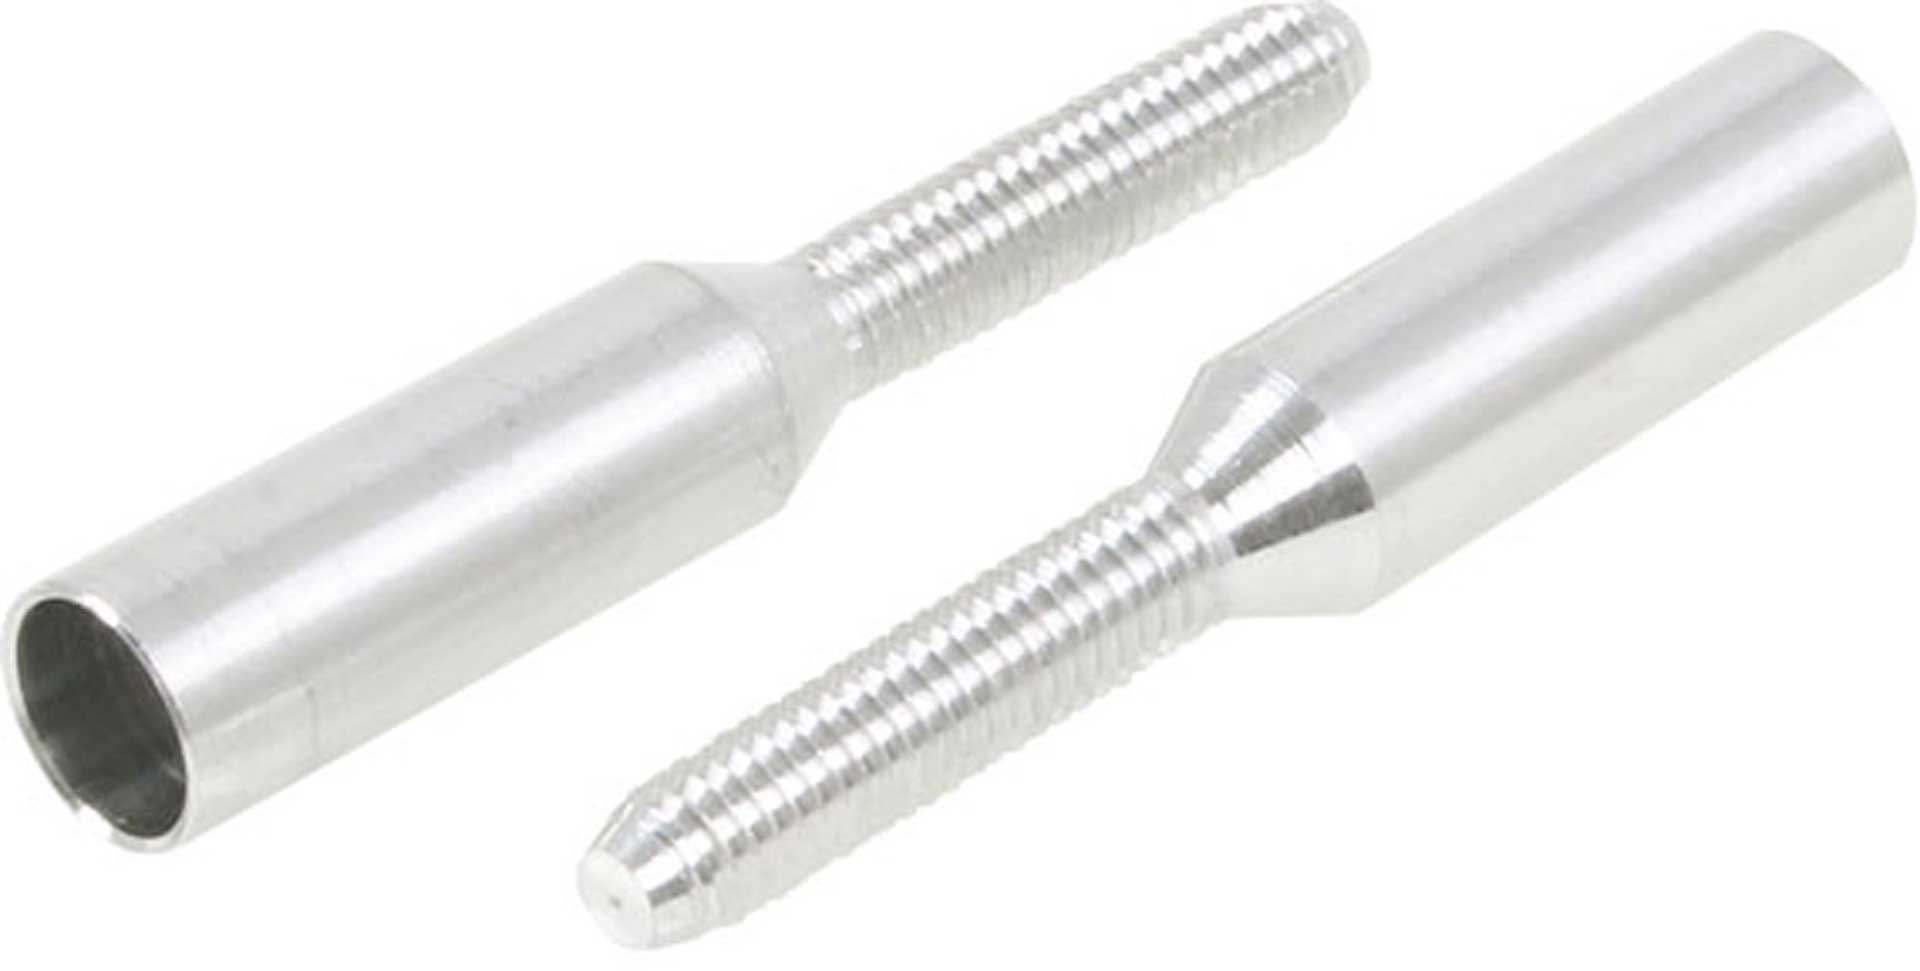 MP-JET PUSH ROD CONNECTOR 6MM M4 2 PCS. FOR 6MM CARBON TUBING